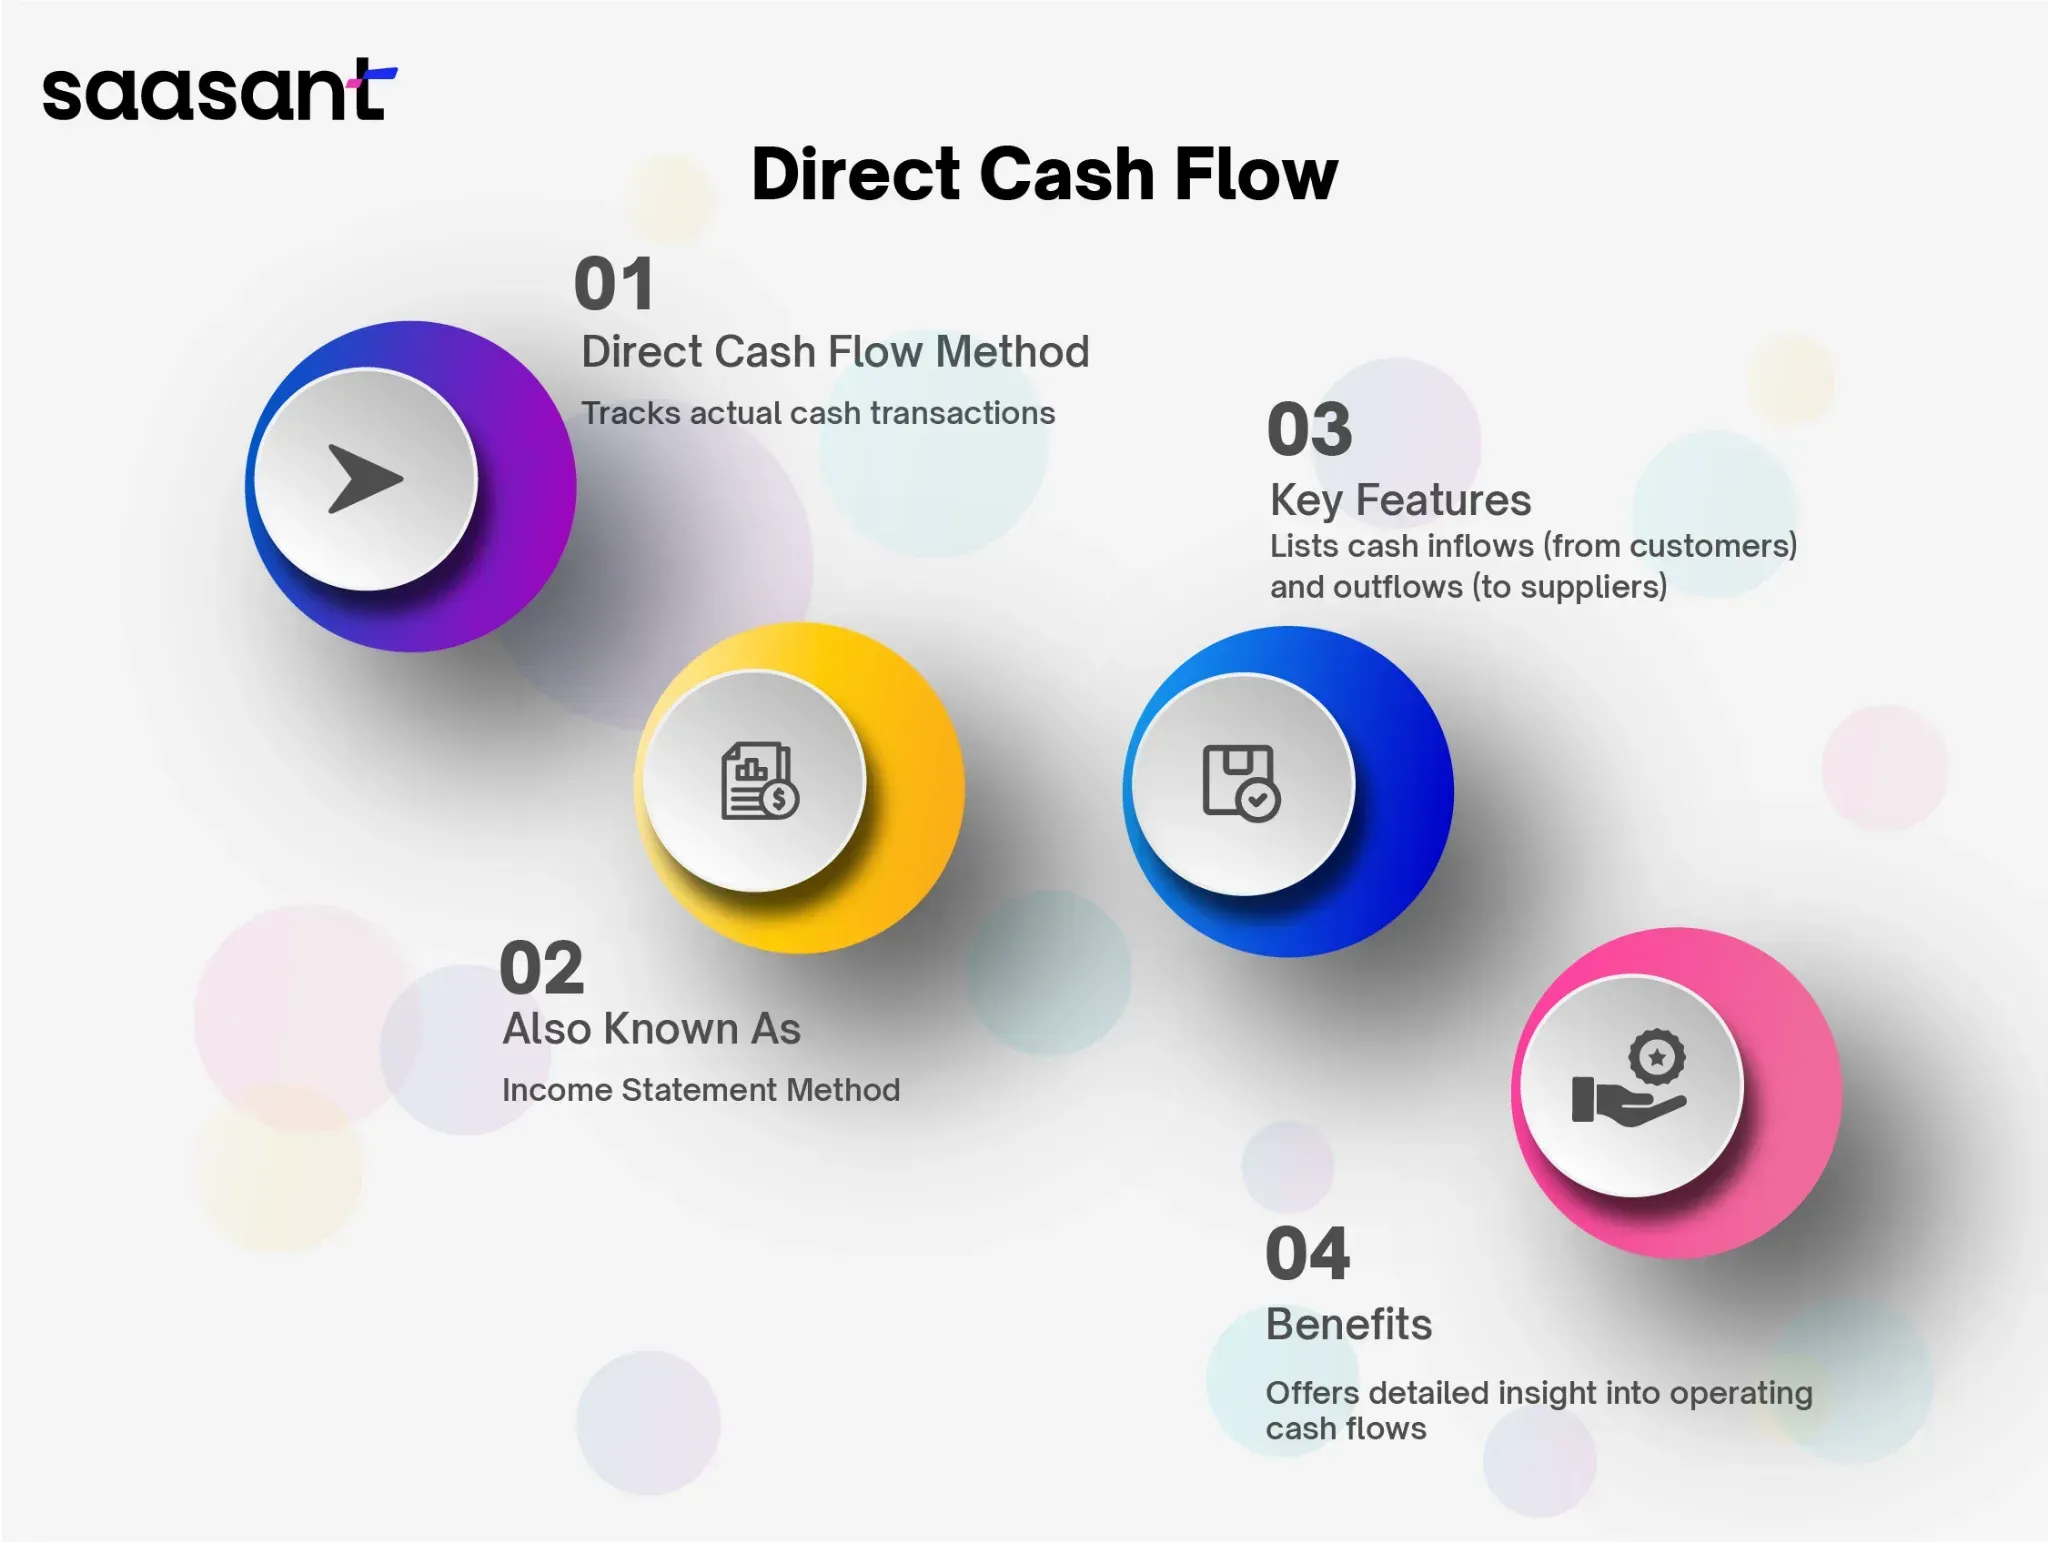 What is Direct Cash Flow?